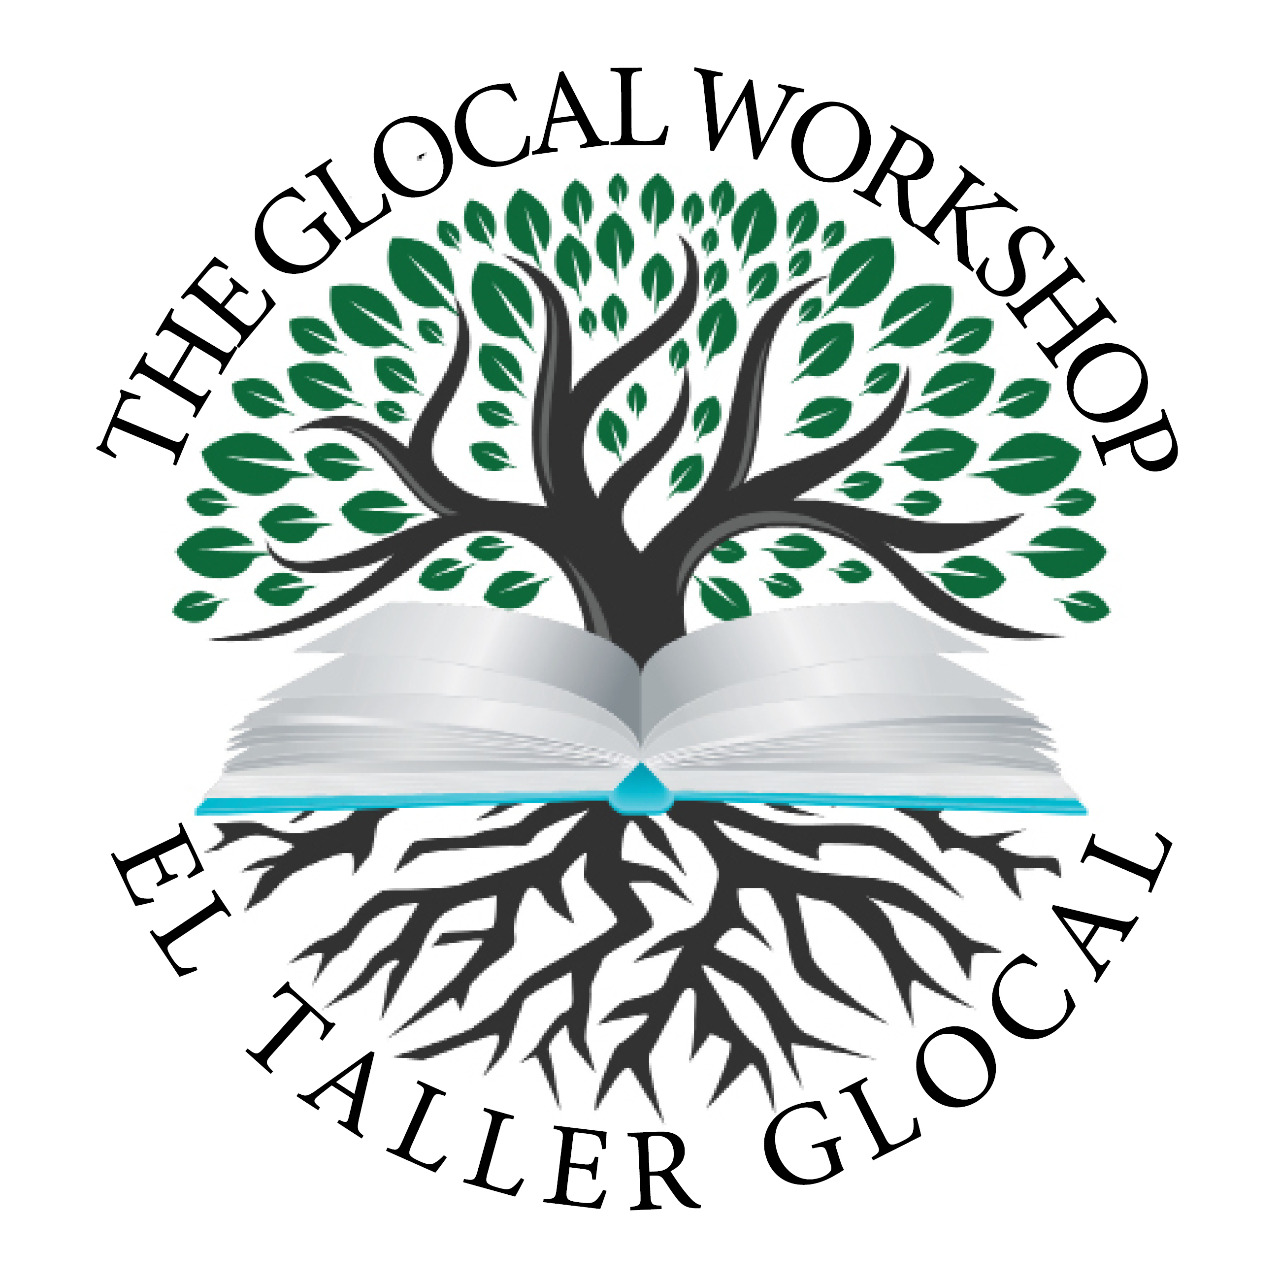 The Glocal Workshop-L'Atelier Glocal – El Taller Glocal